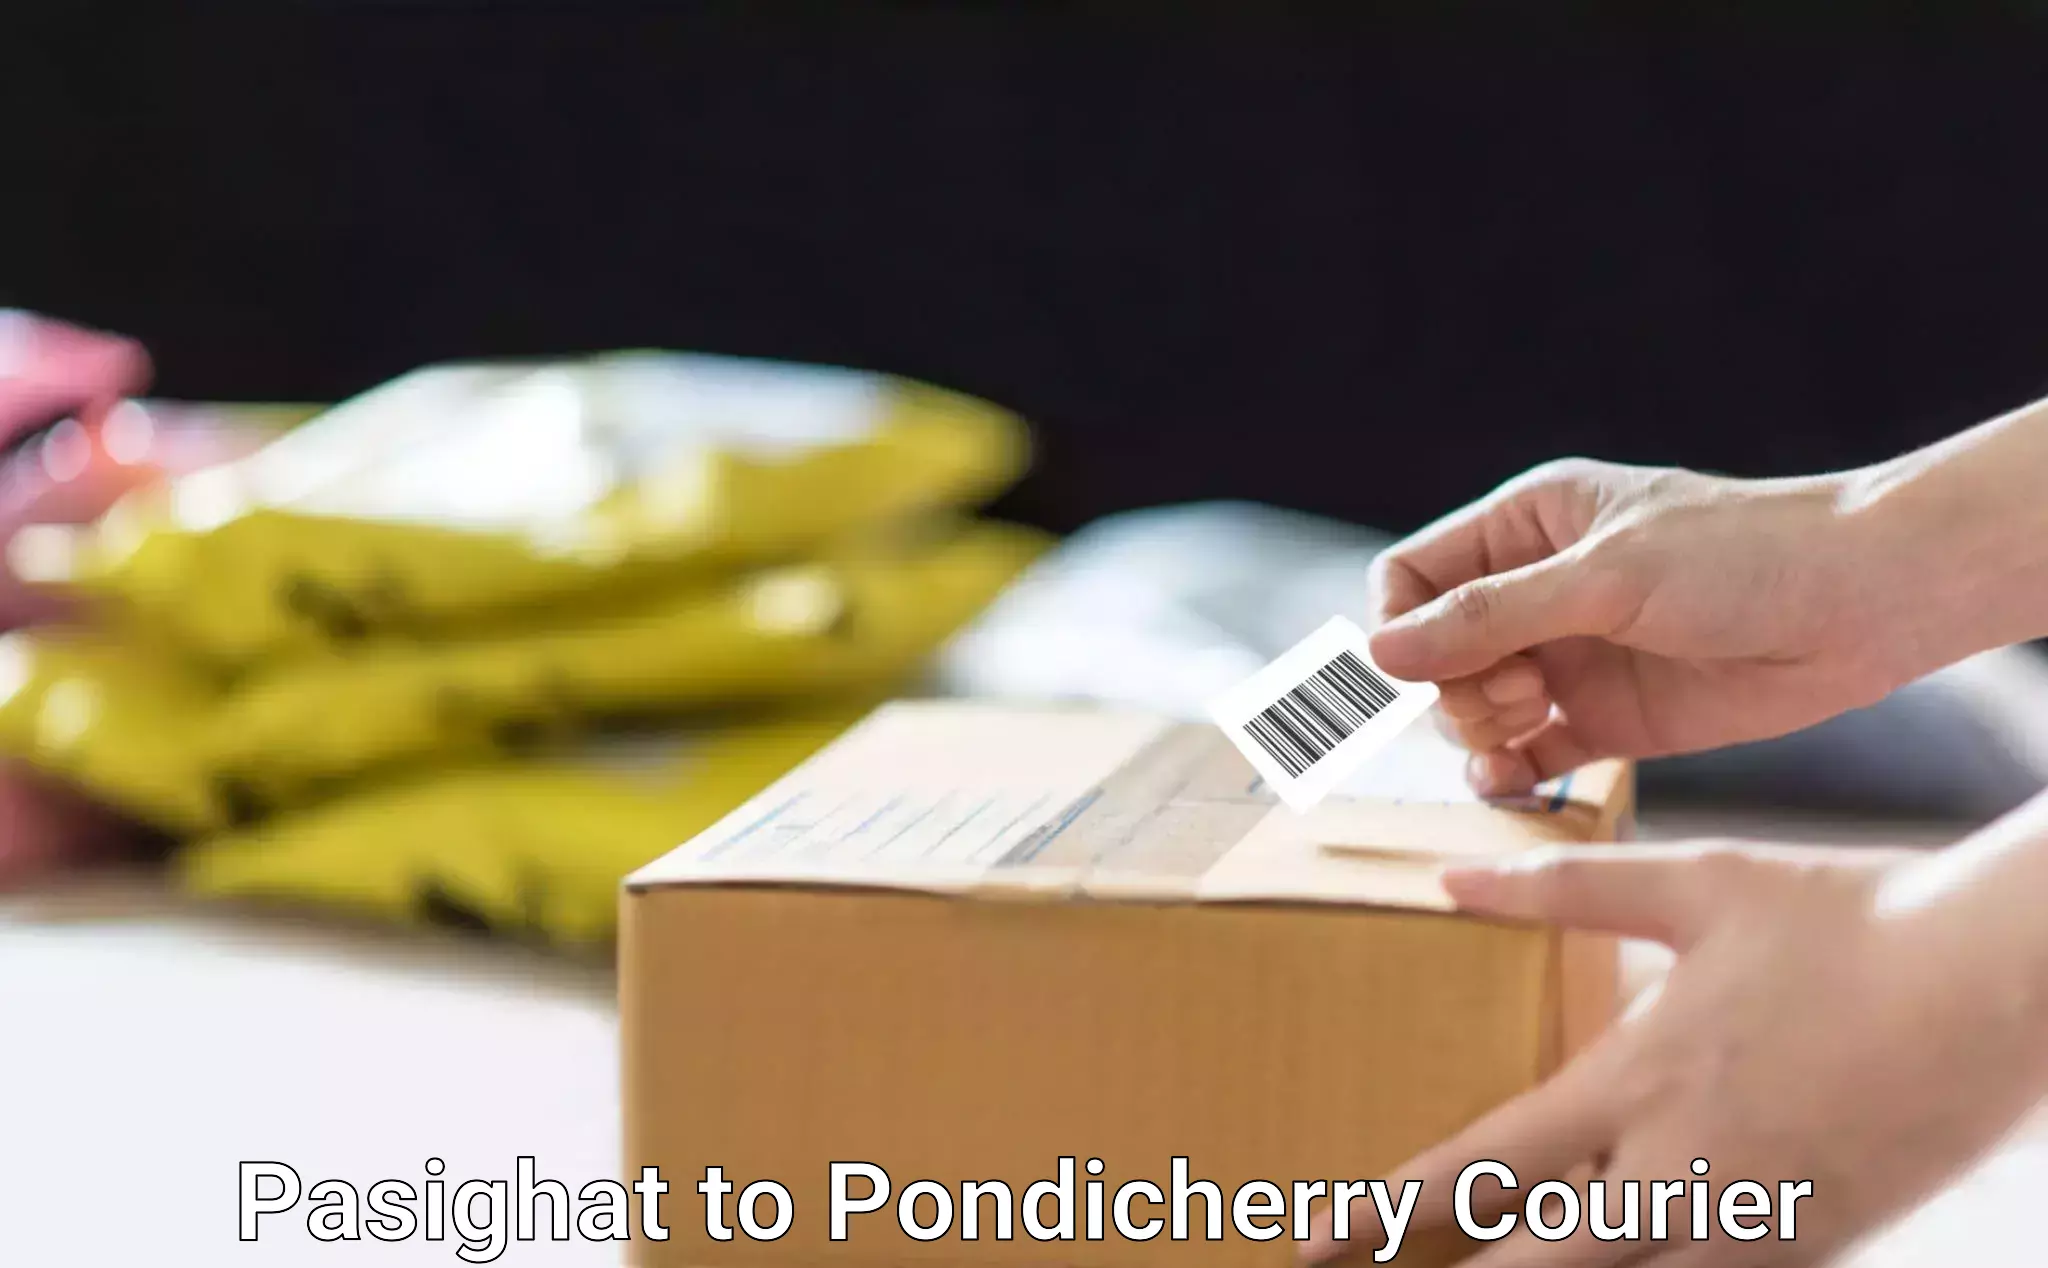 Customer-oriented courier services Pasighat to Pondicherry University